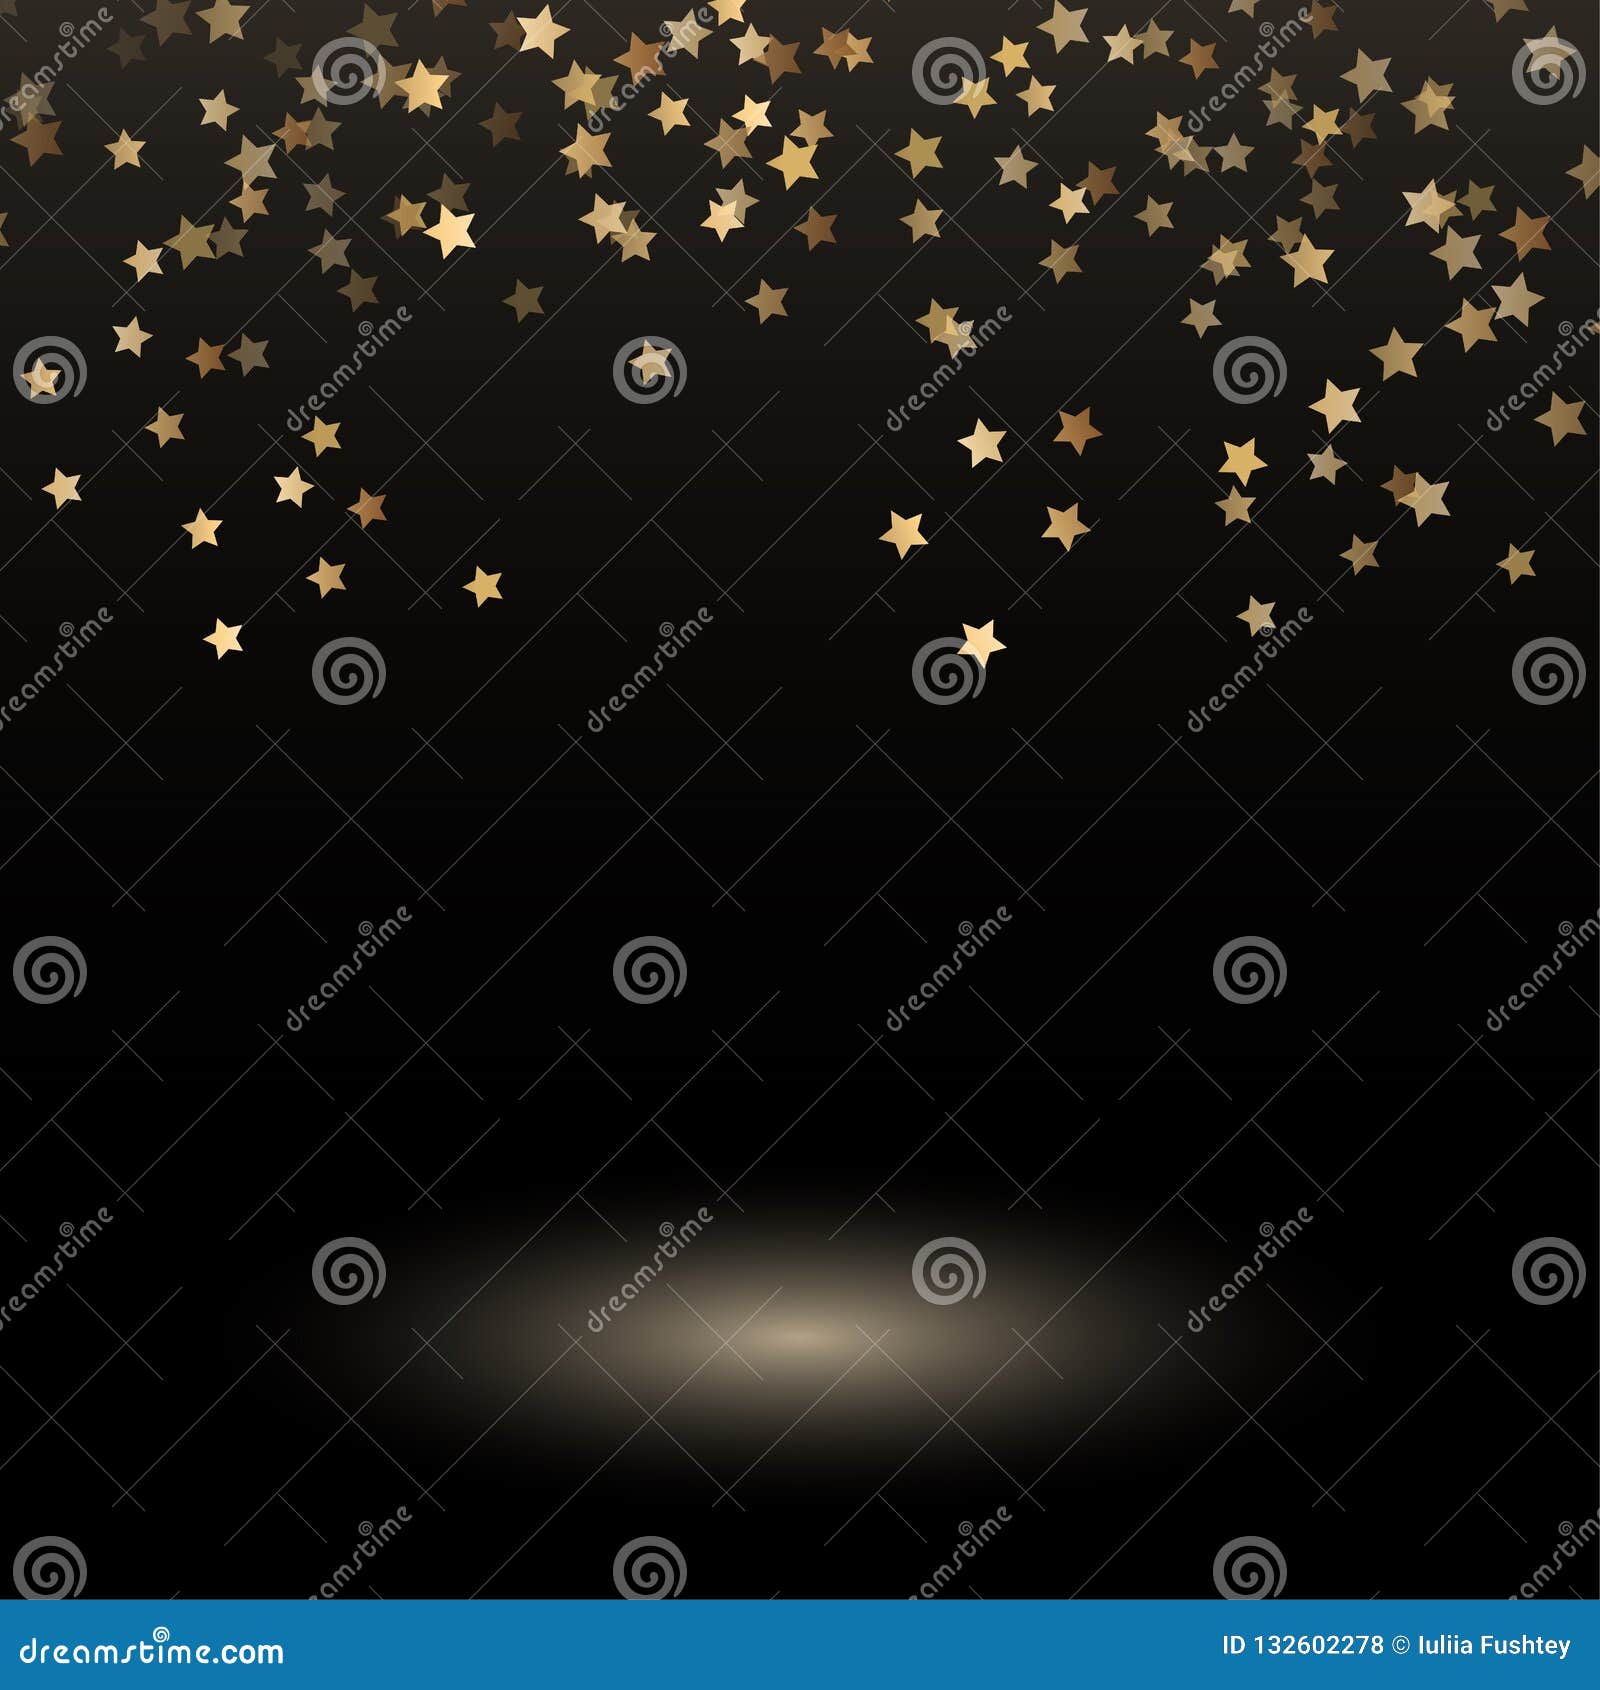 Vector Background with Falling Golden Stars Template Stock Illustration ...